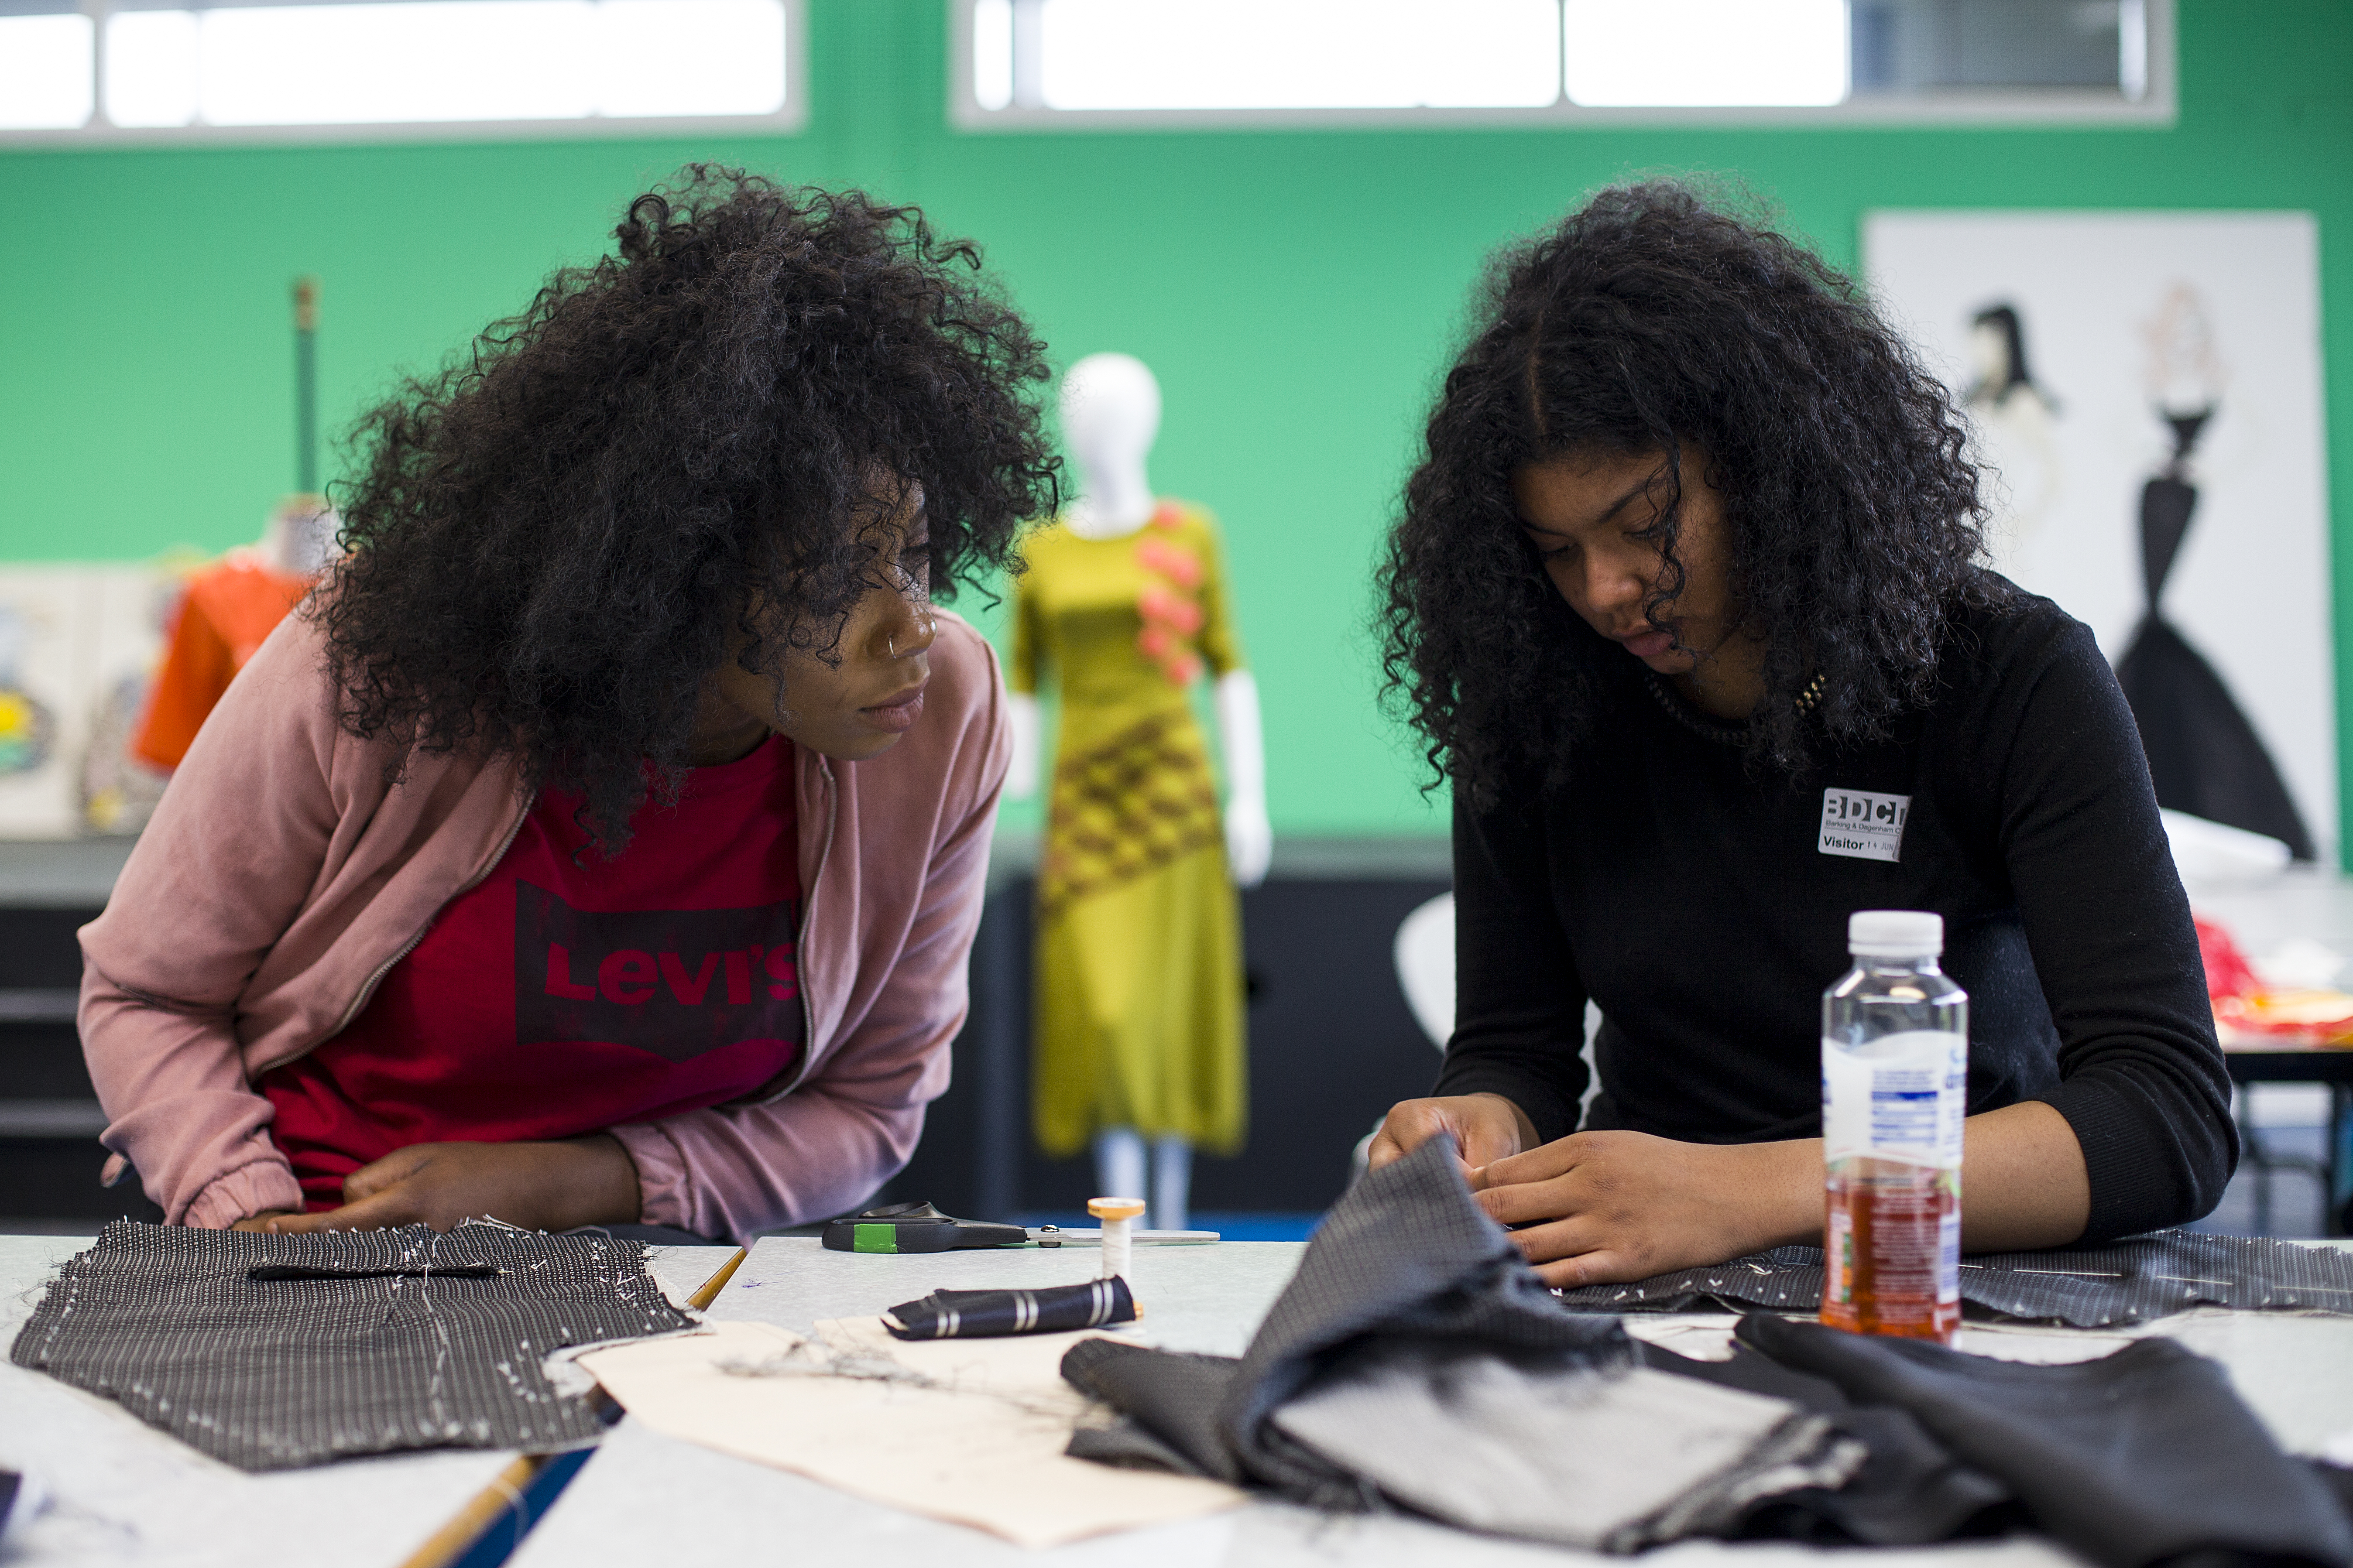 Students from Barking and Dagenham college taking part in the tailoring workshop